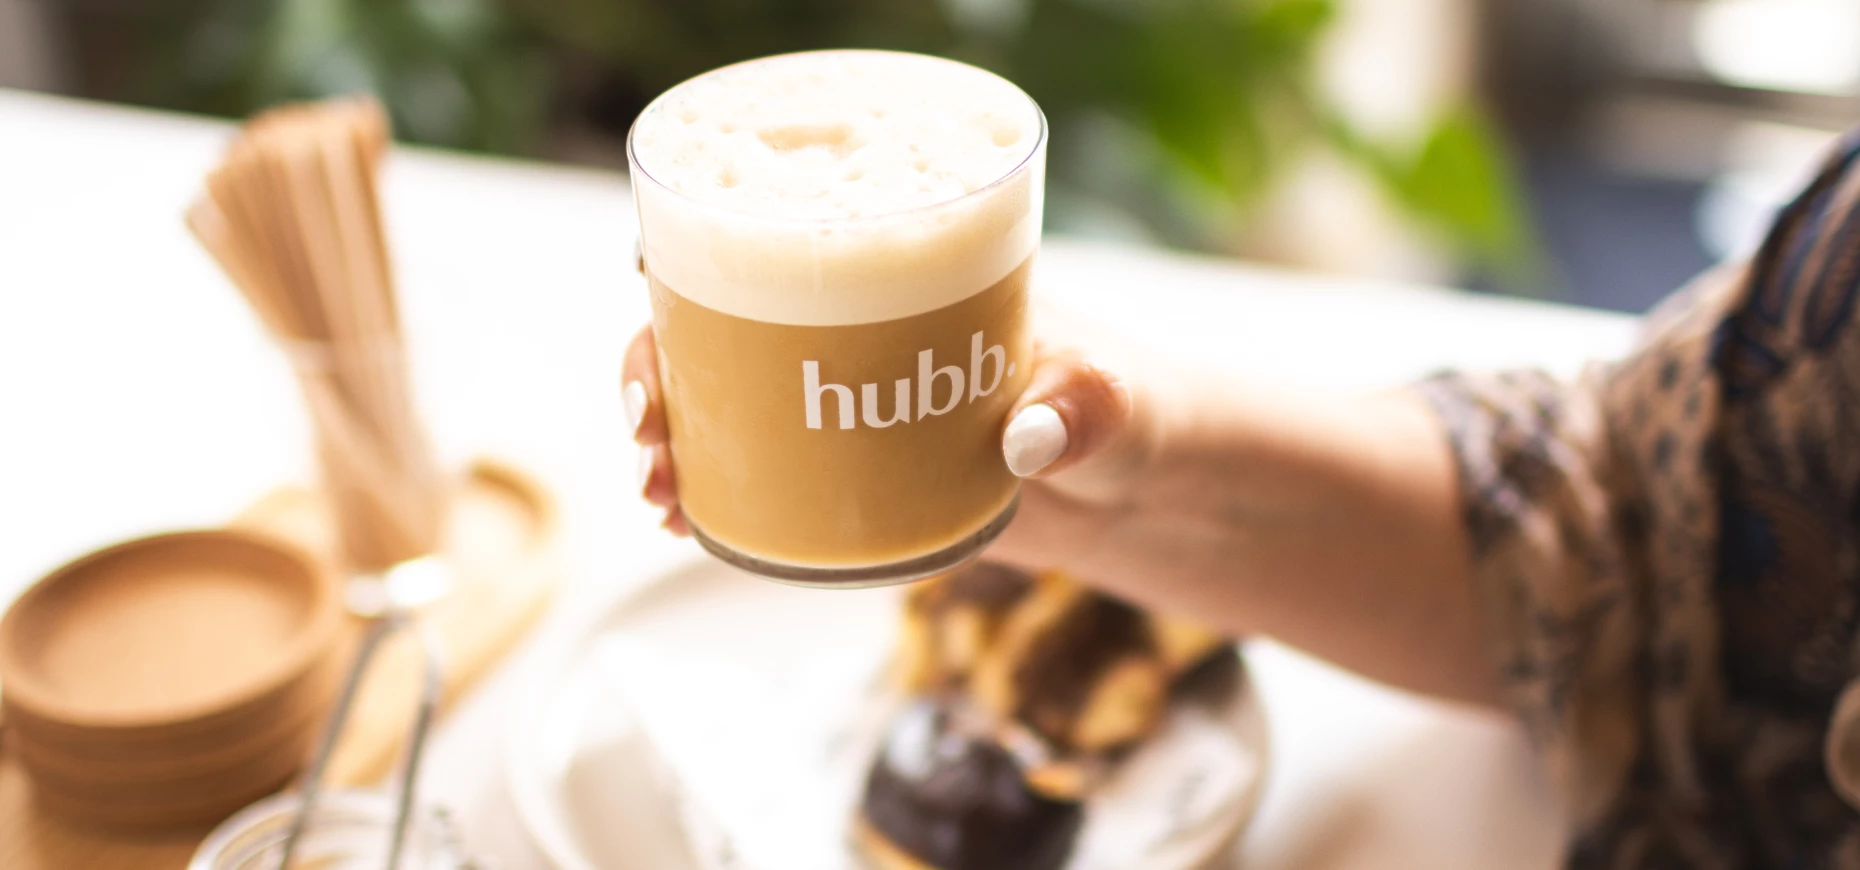 A woman's hand holds a cup of hubb nitro coffee.